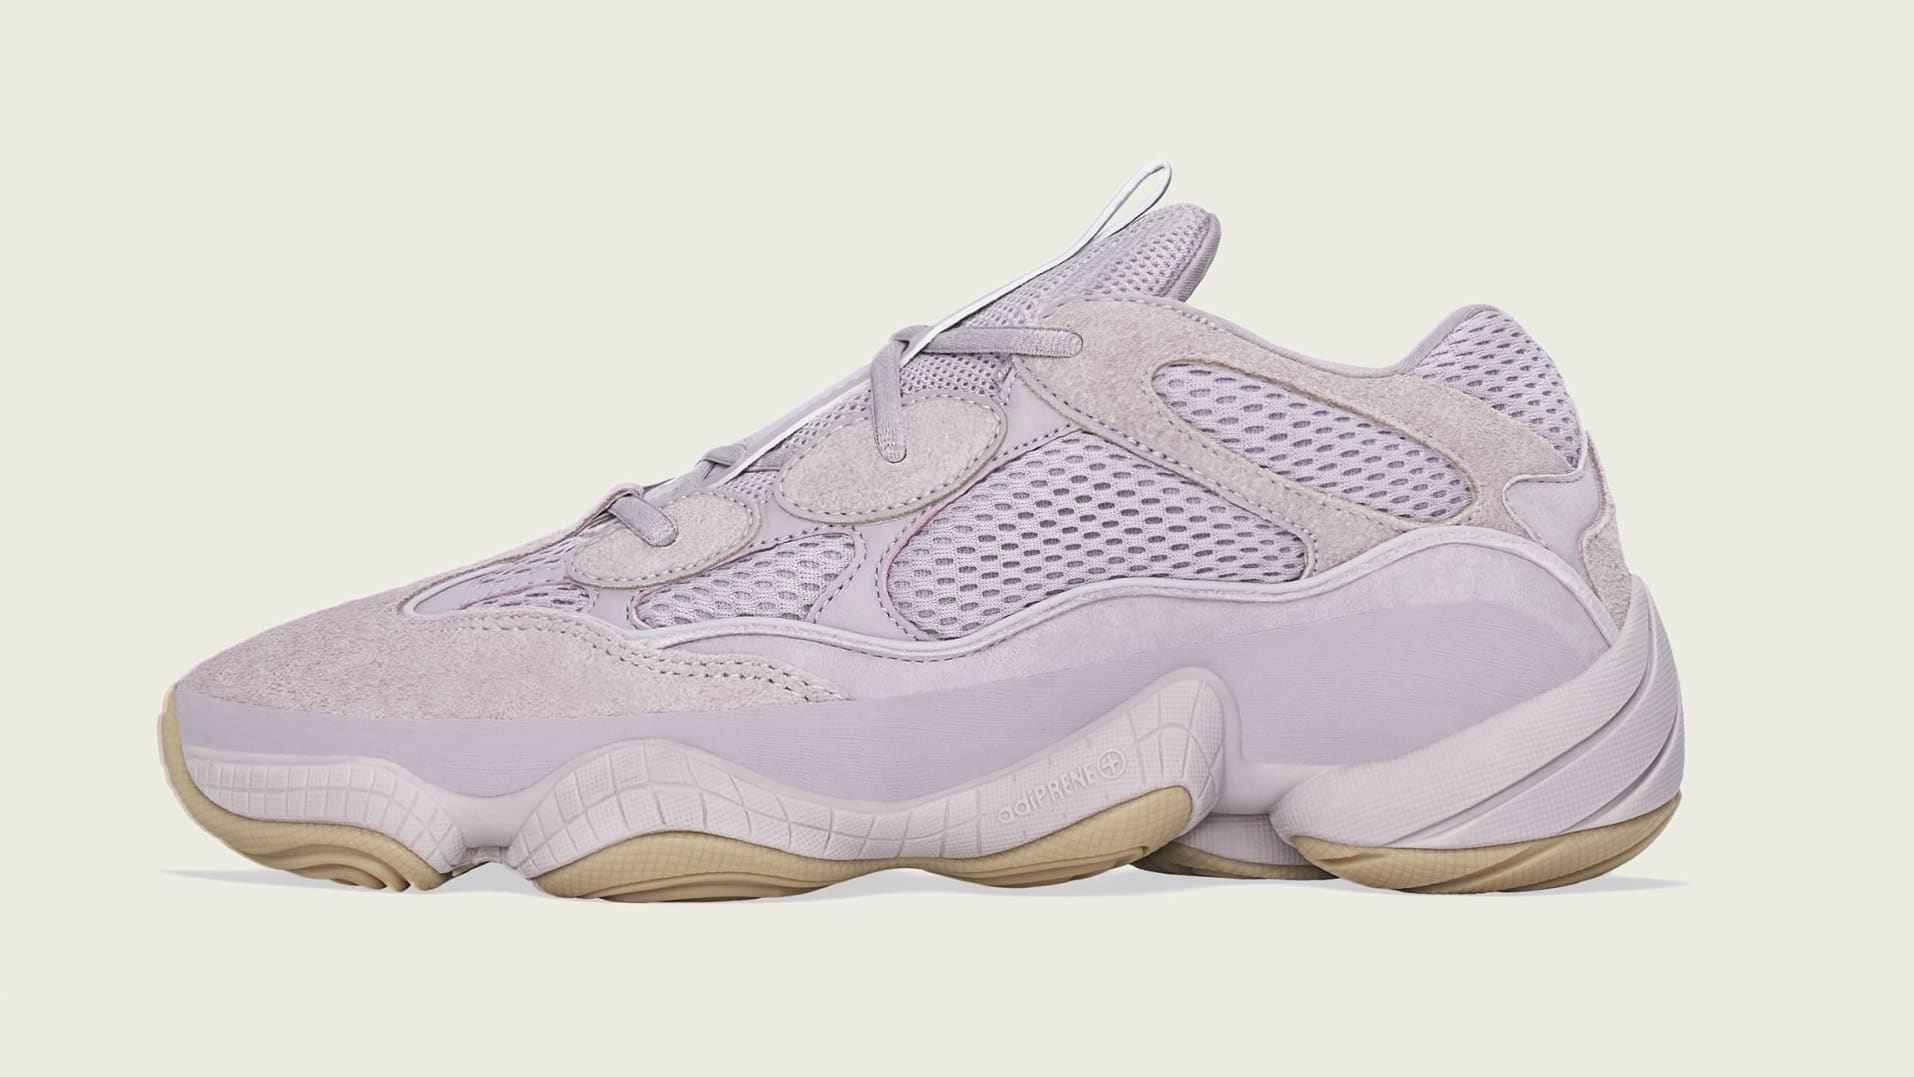 Adidas Yeezy 500 &quot;St Vision&quot; Officially Unveiled: Release Details